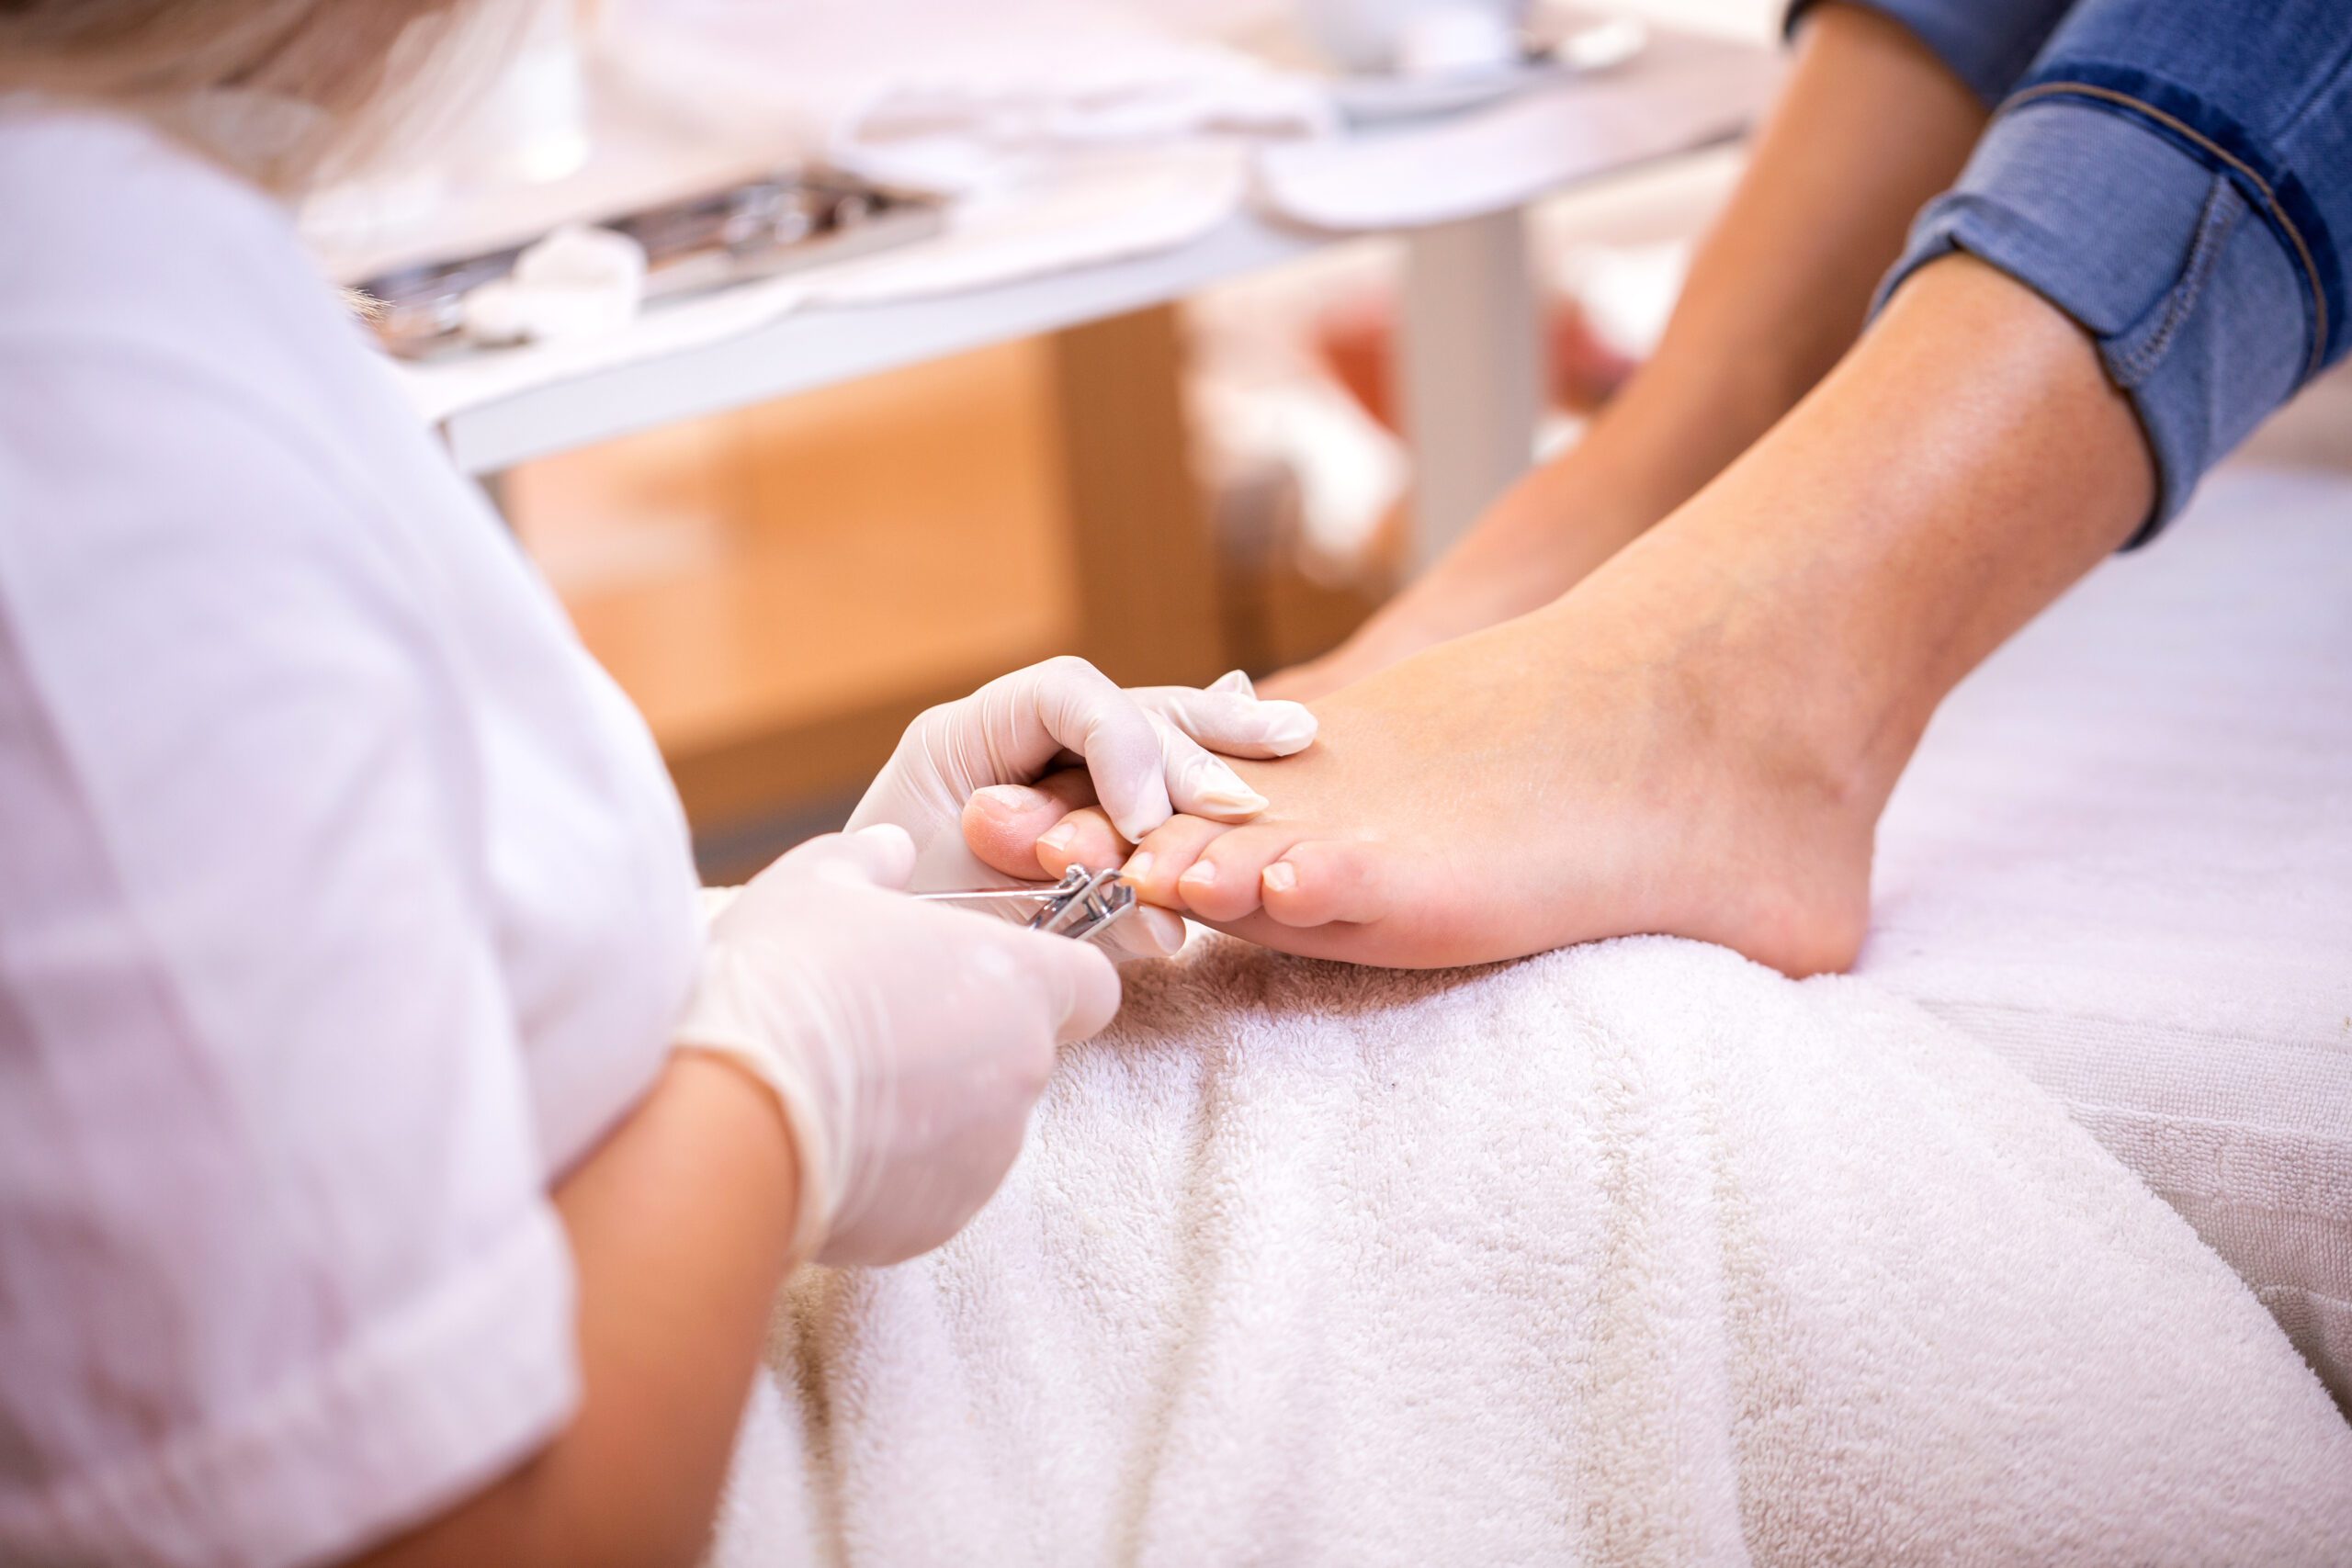 Featured image for “Why Take Care of Your Feet with a Regular Pedicure?”